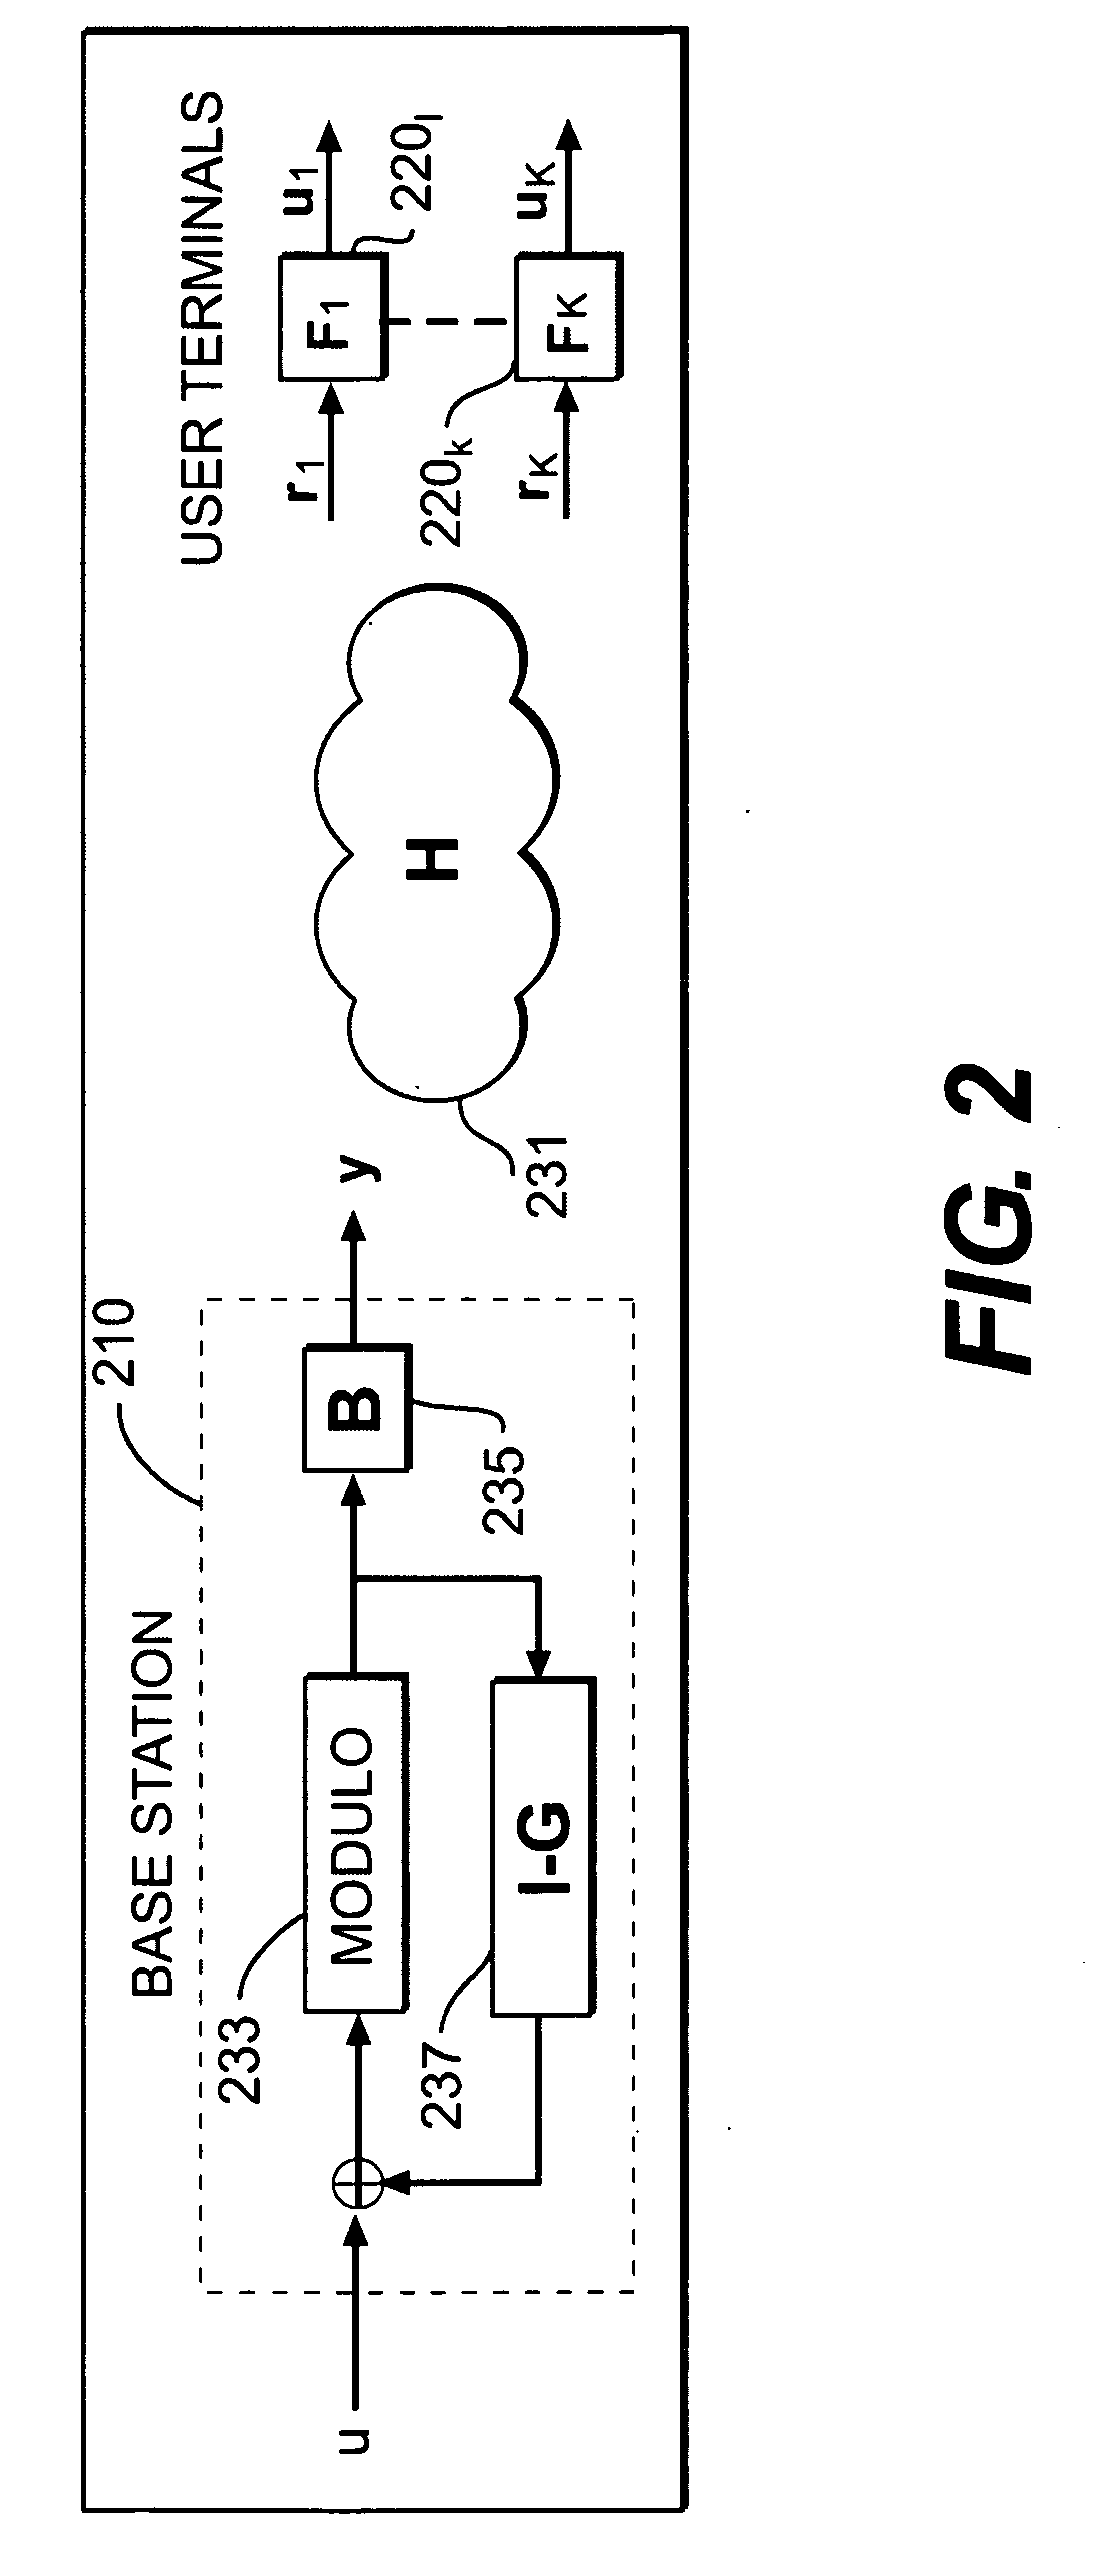 Fast generalized decision feedback equalizer precoder implementation for multi-user multiple-input multiple-output wireless transmission systems